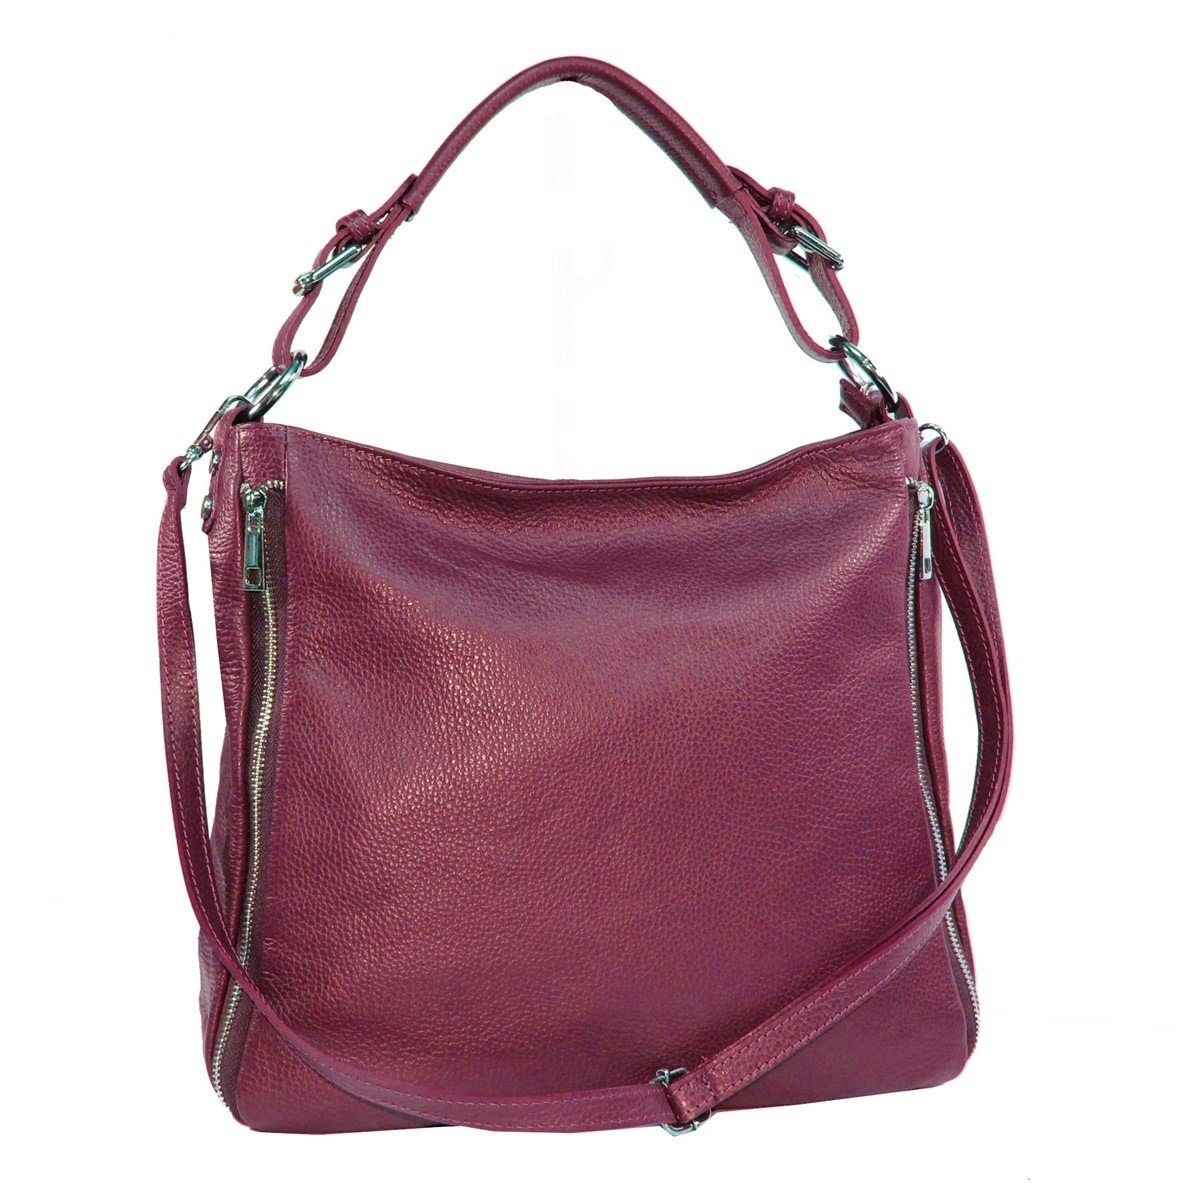 in fs-bags fs7142, Italy Handtasche Weinrot Made